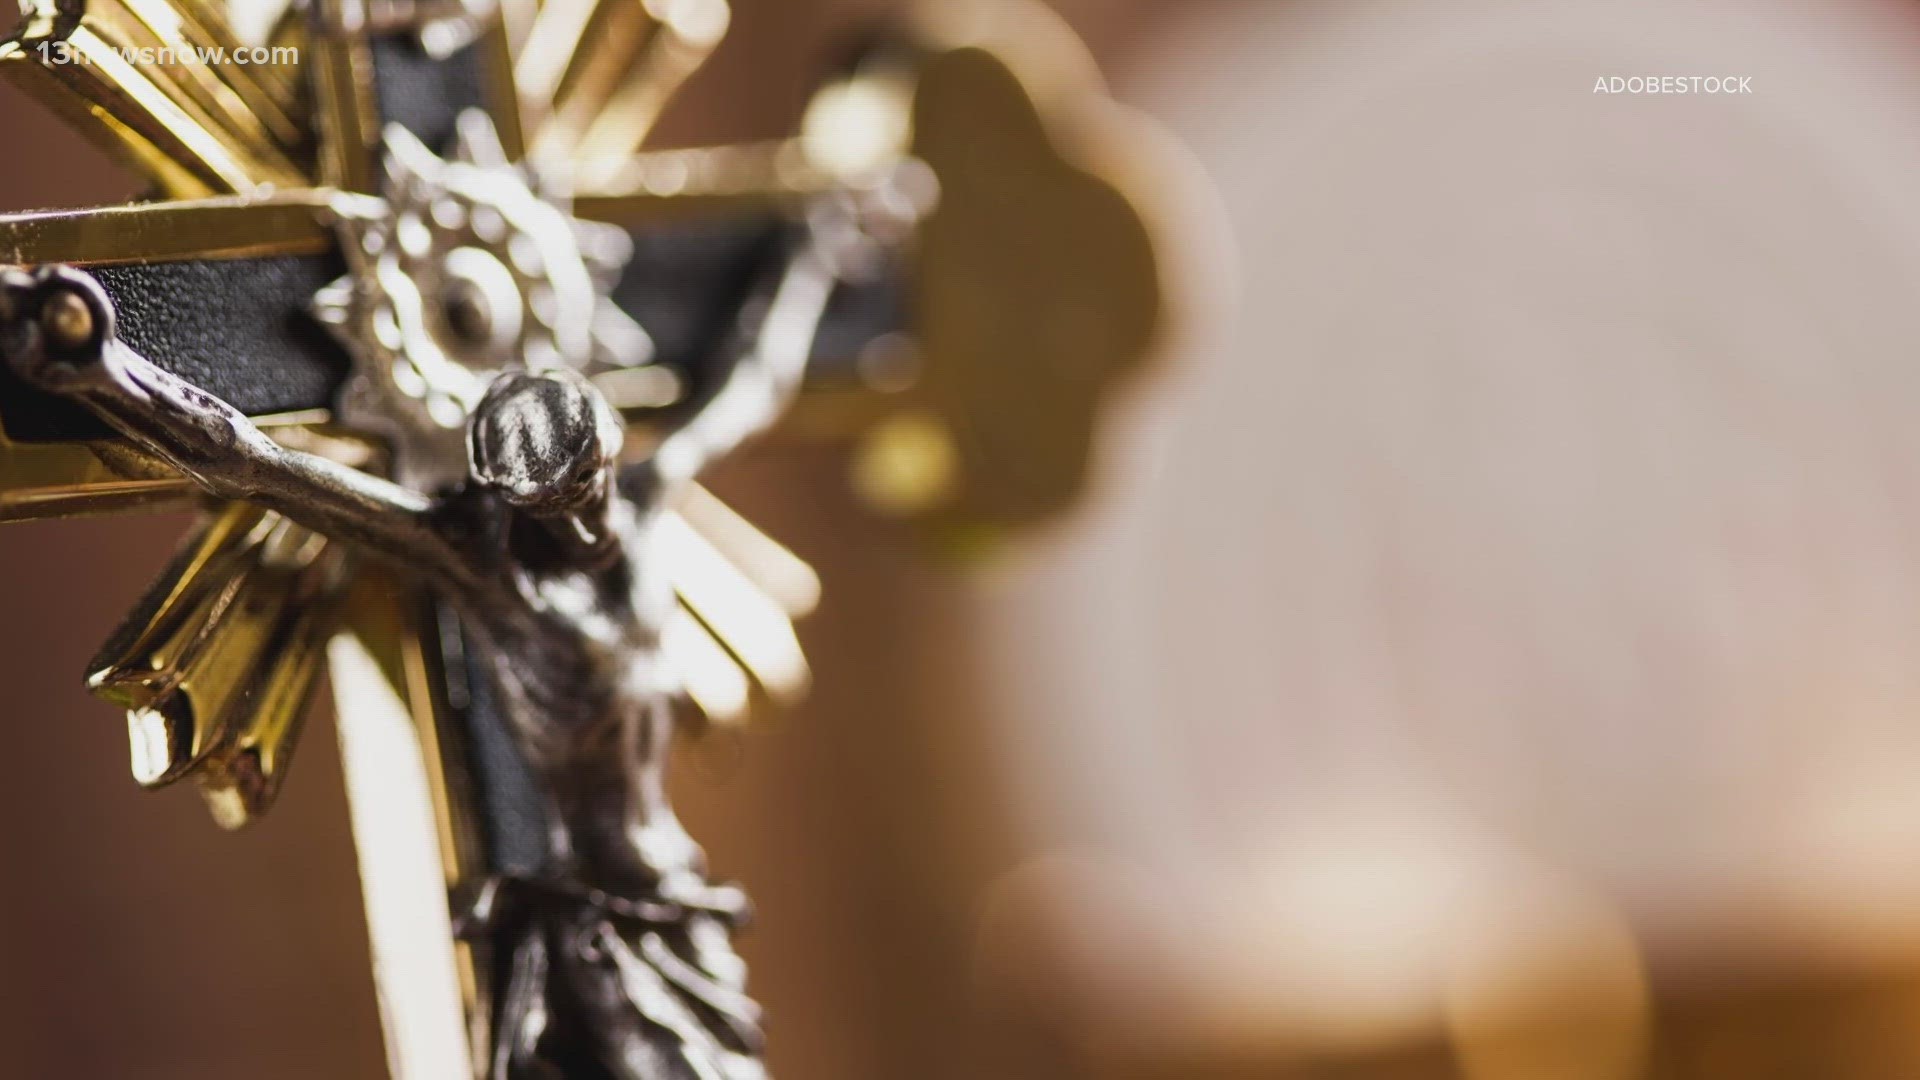 A Catholic priest who once served at a church in Virginia Beach is under investigation, facing allegations of child sexual abuse.